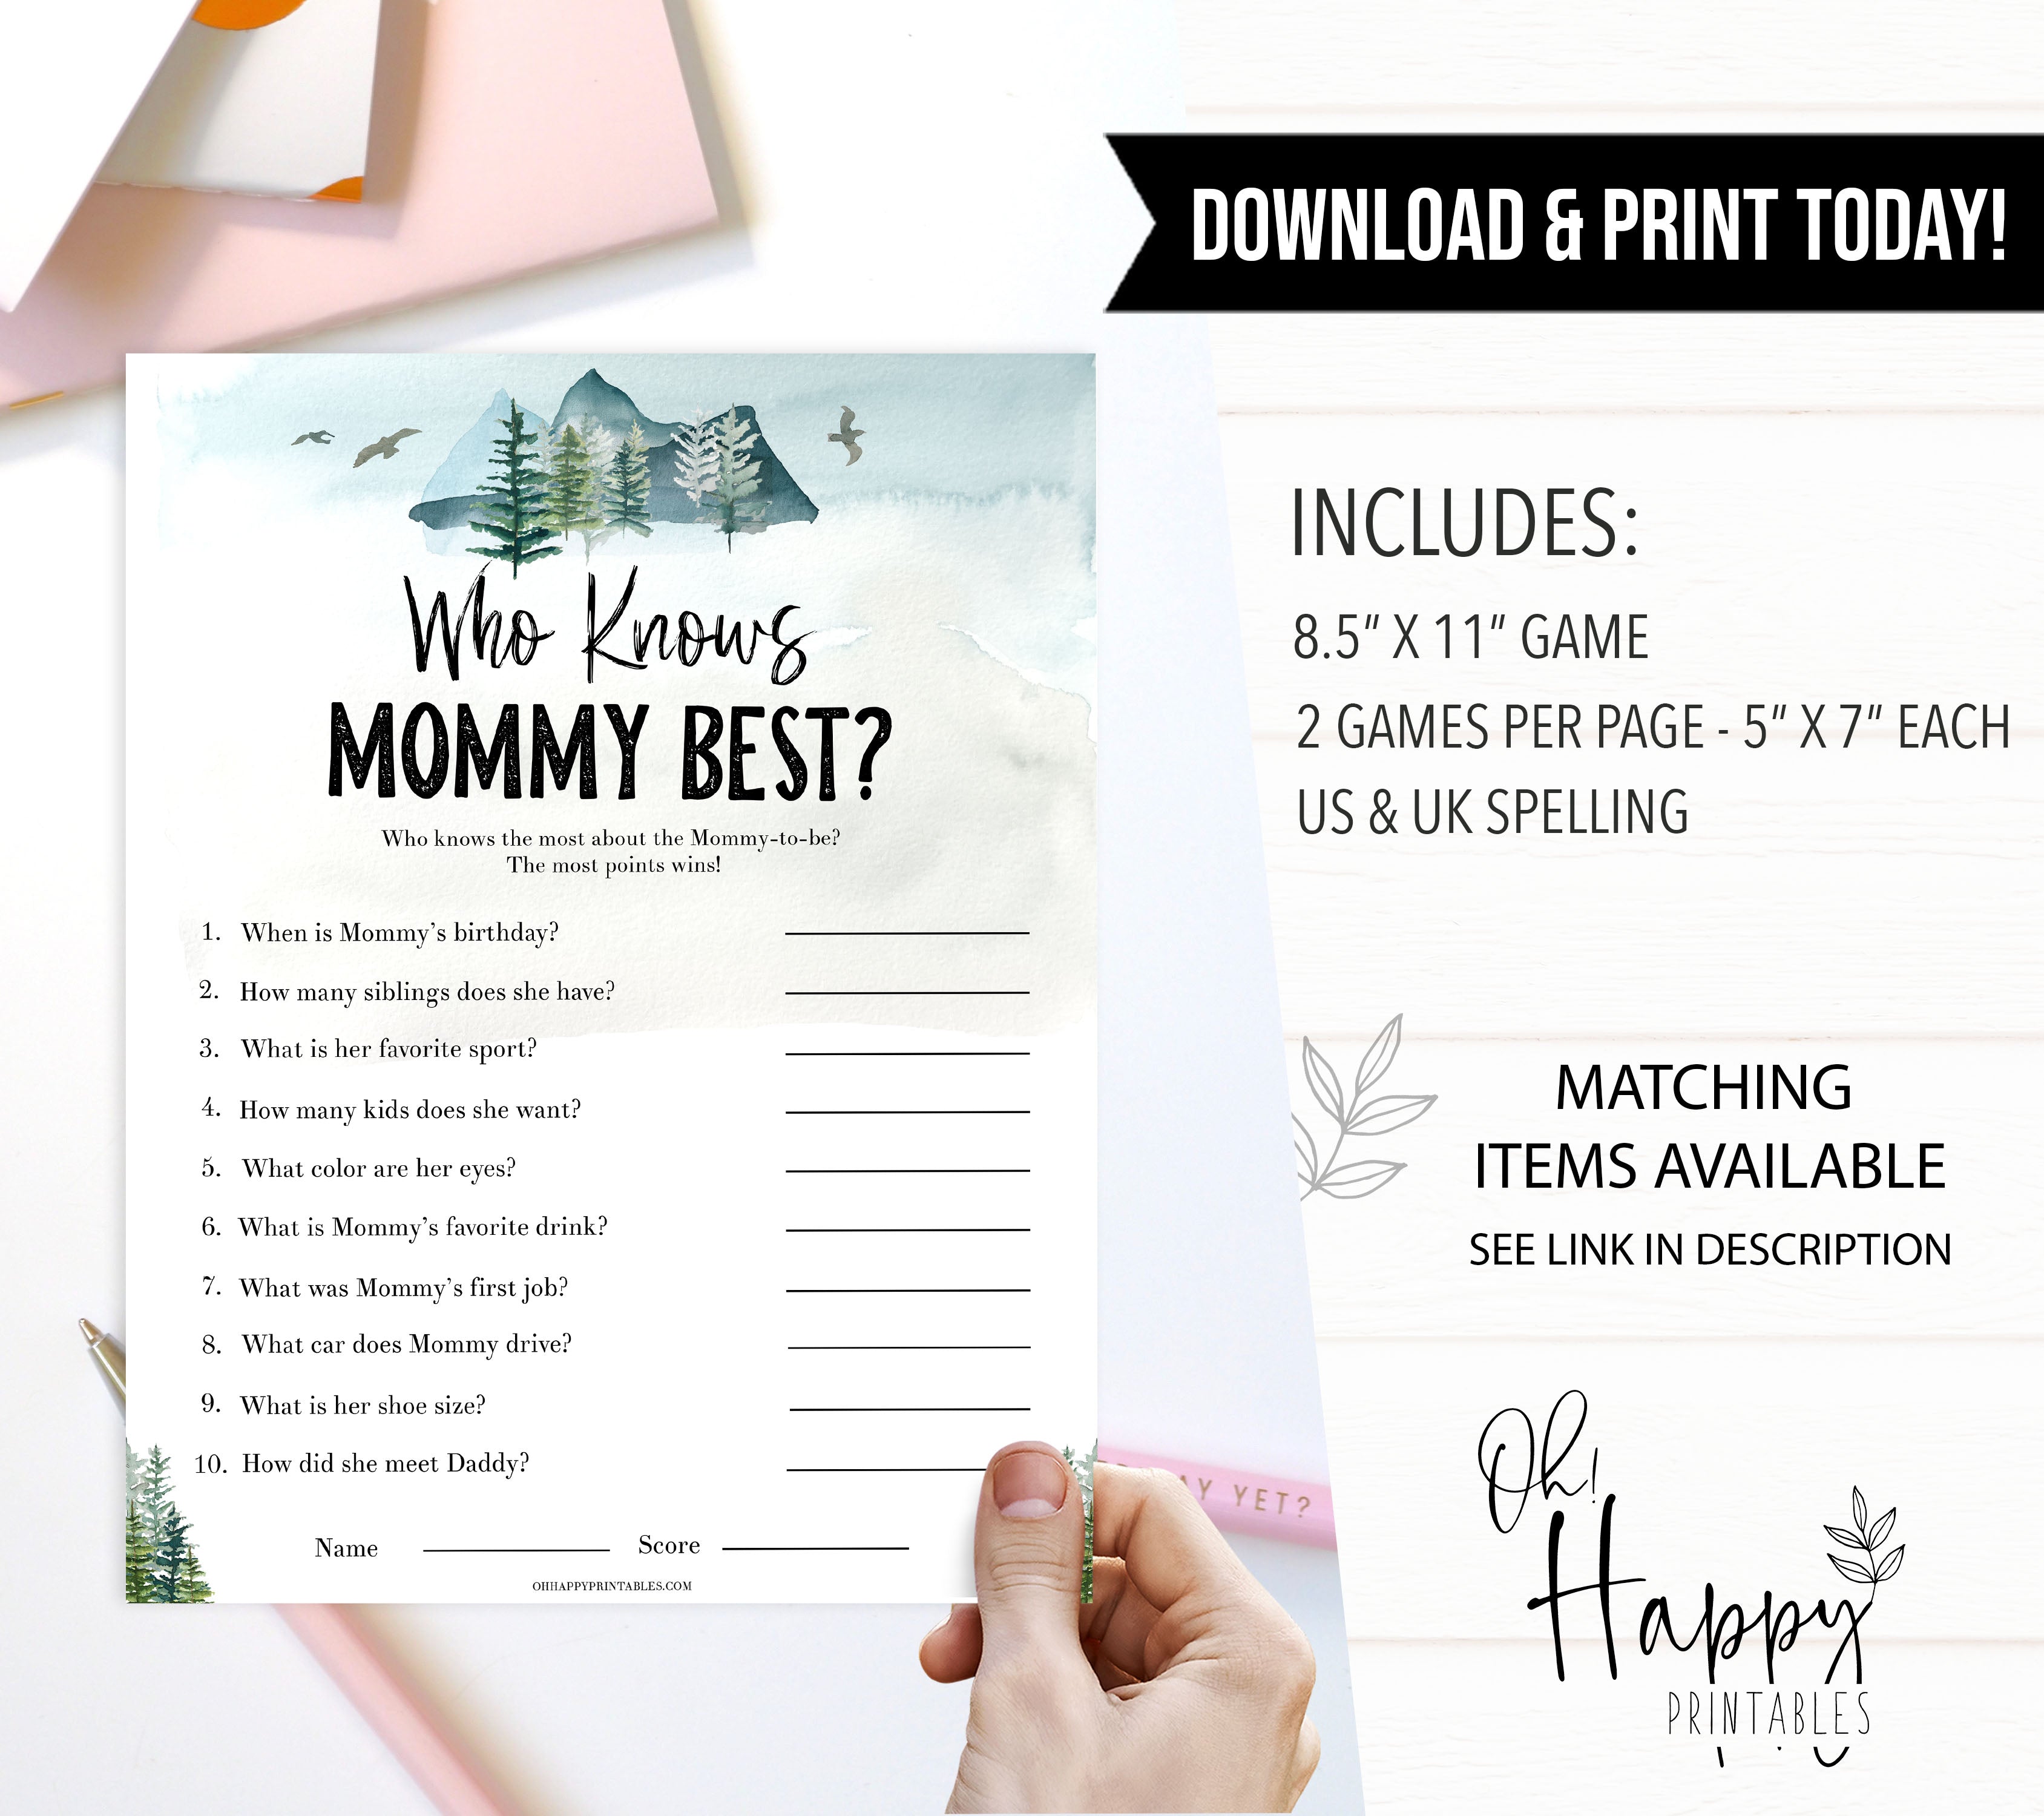 editable who knows mommy best game, Printable baby shower games, adventure awaits baby games, baby shower games, fun baby shower ideas, top baby shower ideas, adventure awaits baby shower, baby shower games, fun adventure baby shower ideas